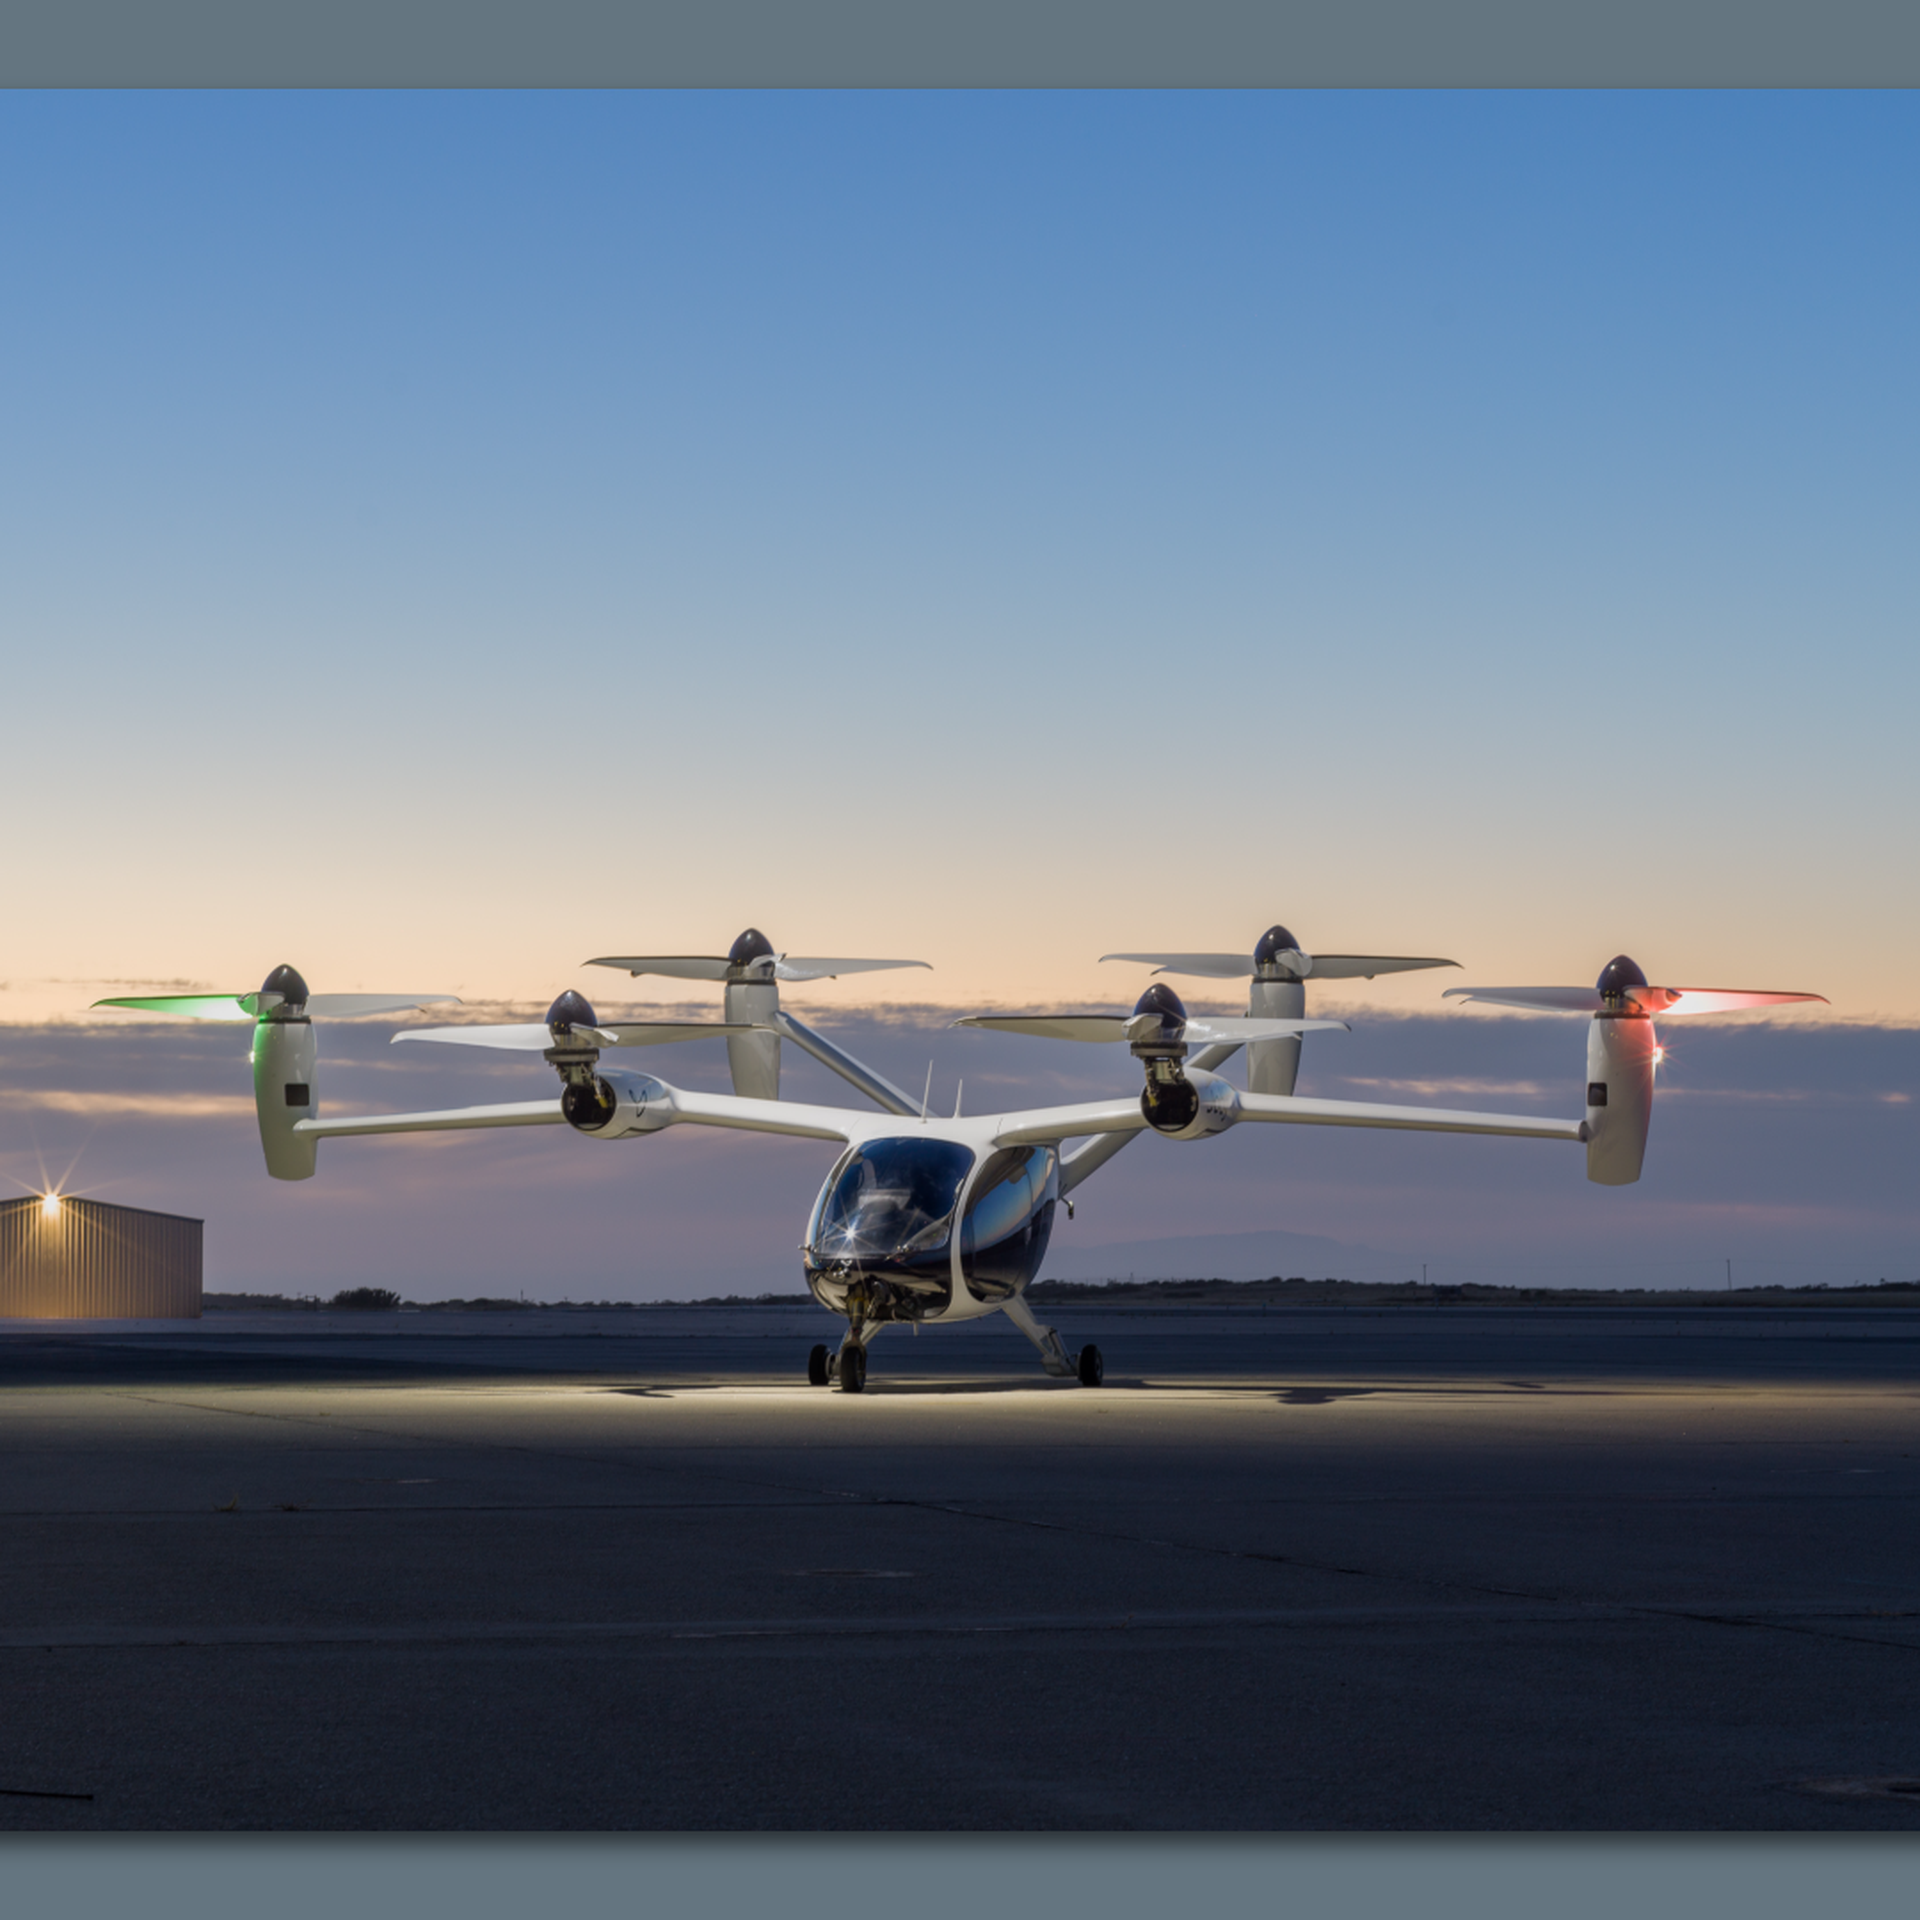 Image of Joby's multi-rotor electric vertical takeoff and landing aircraft on an airfield at dusk. 